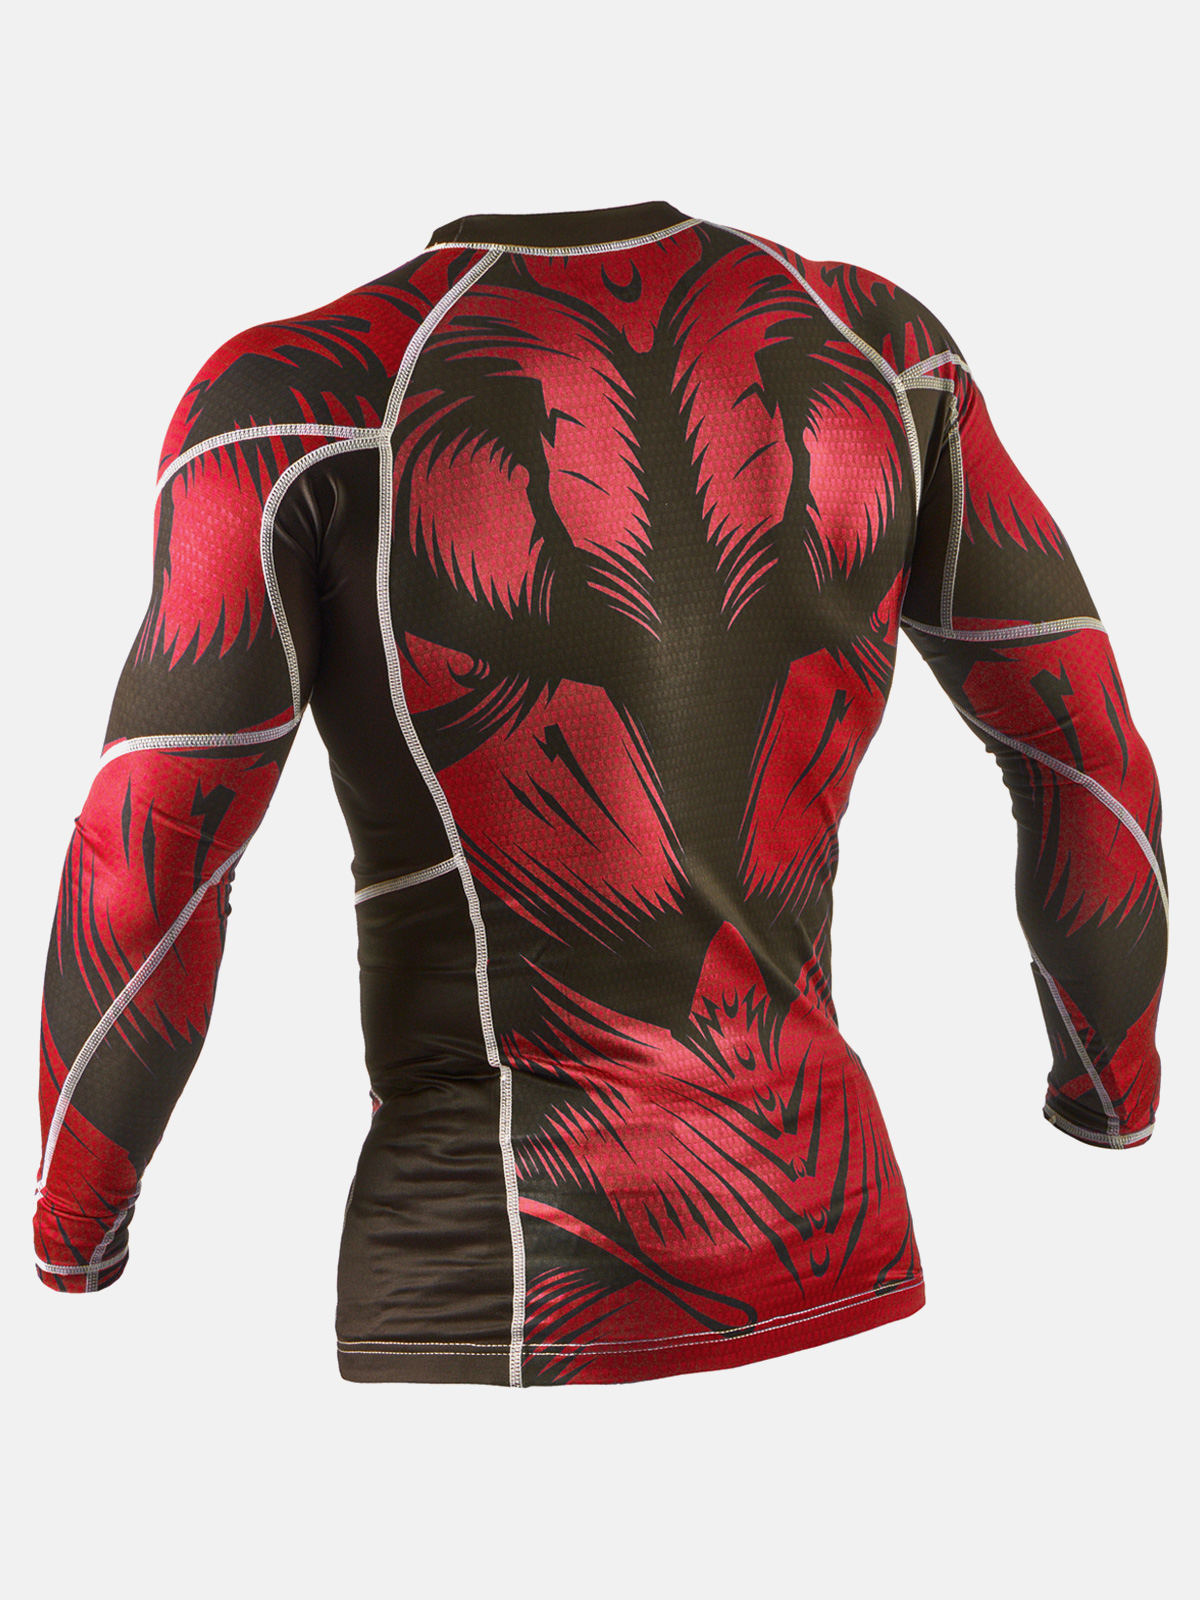 Peresvit Beast Silver Force Long Sleeve Red, Photo No. 3